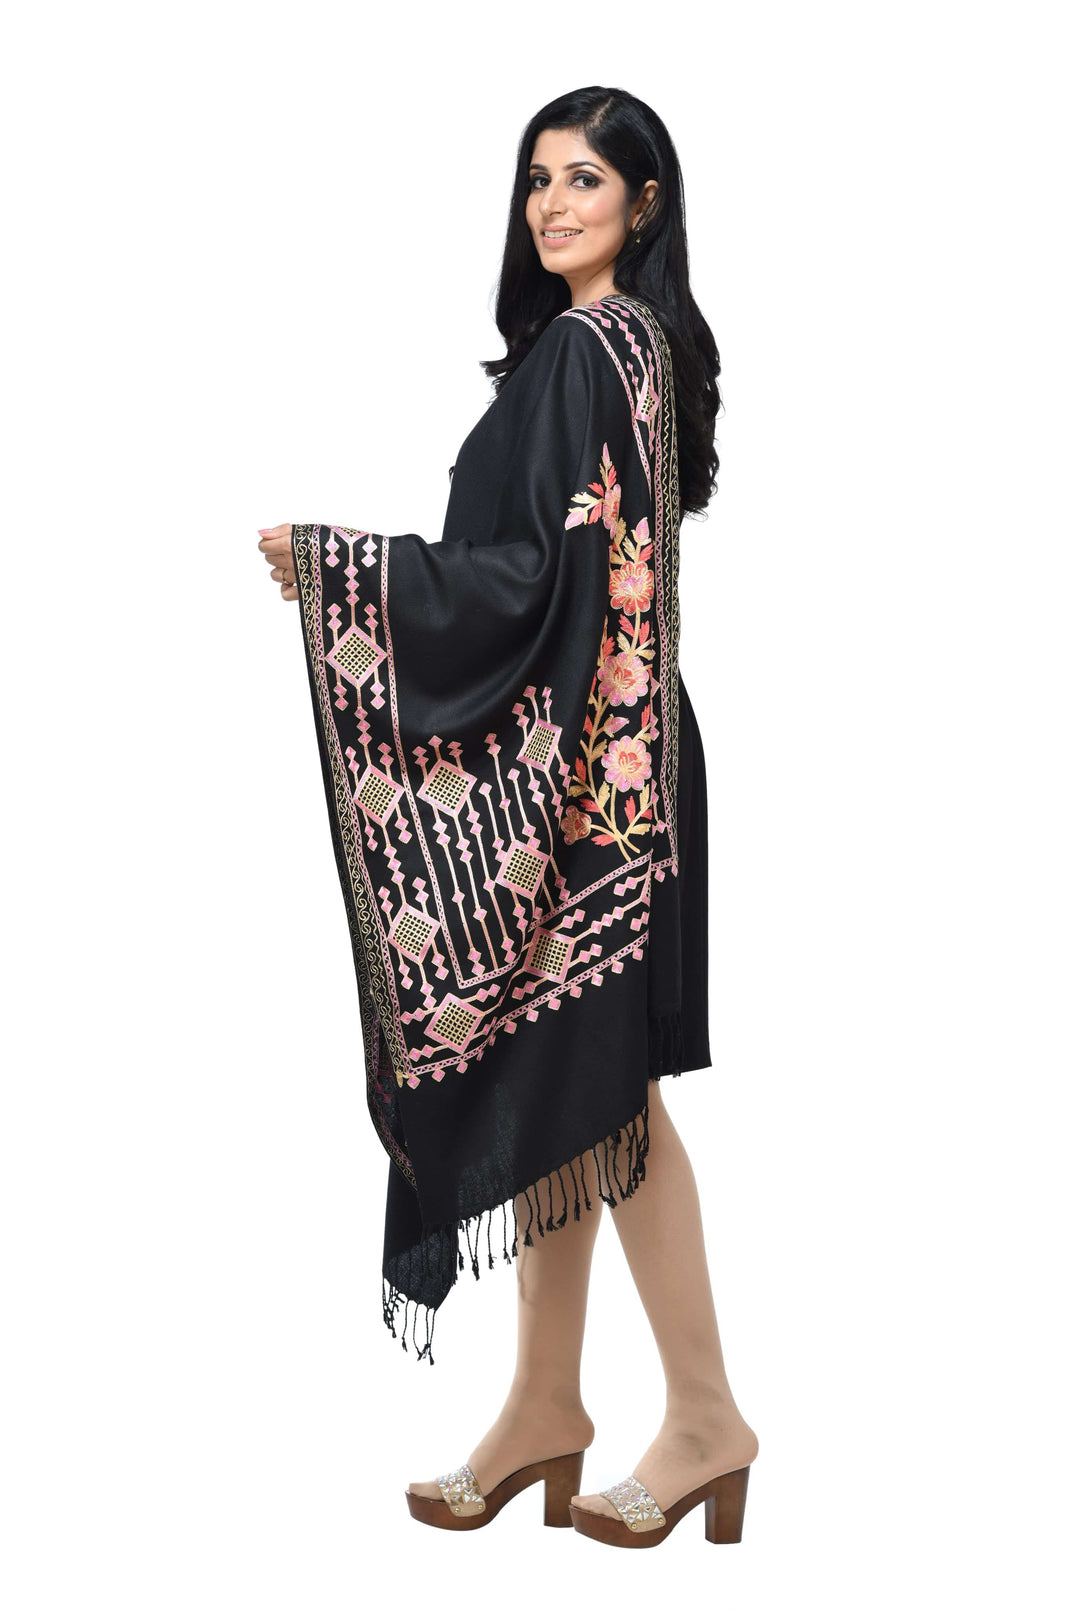 Pashwool Womens Stoles and Scarves Scarf Pashwool Womens Stole, Kashmiri Embroidery, Soft And Warm, Woollen Stole, Black